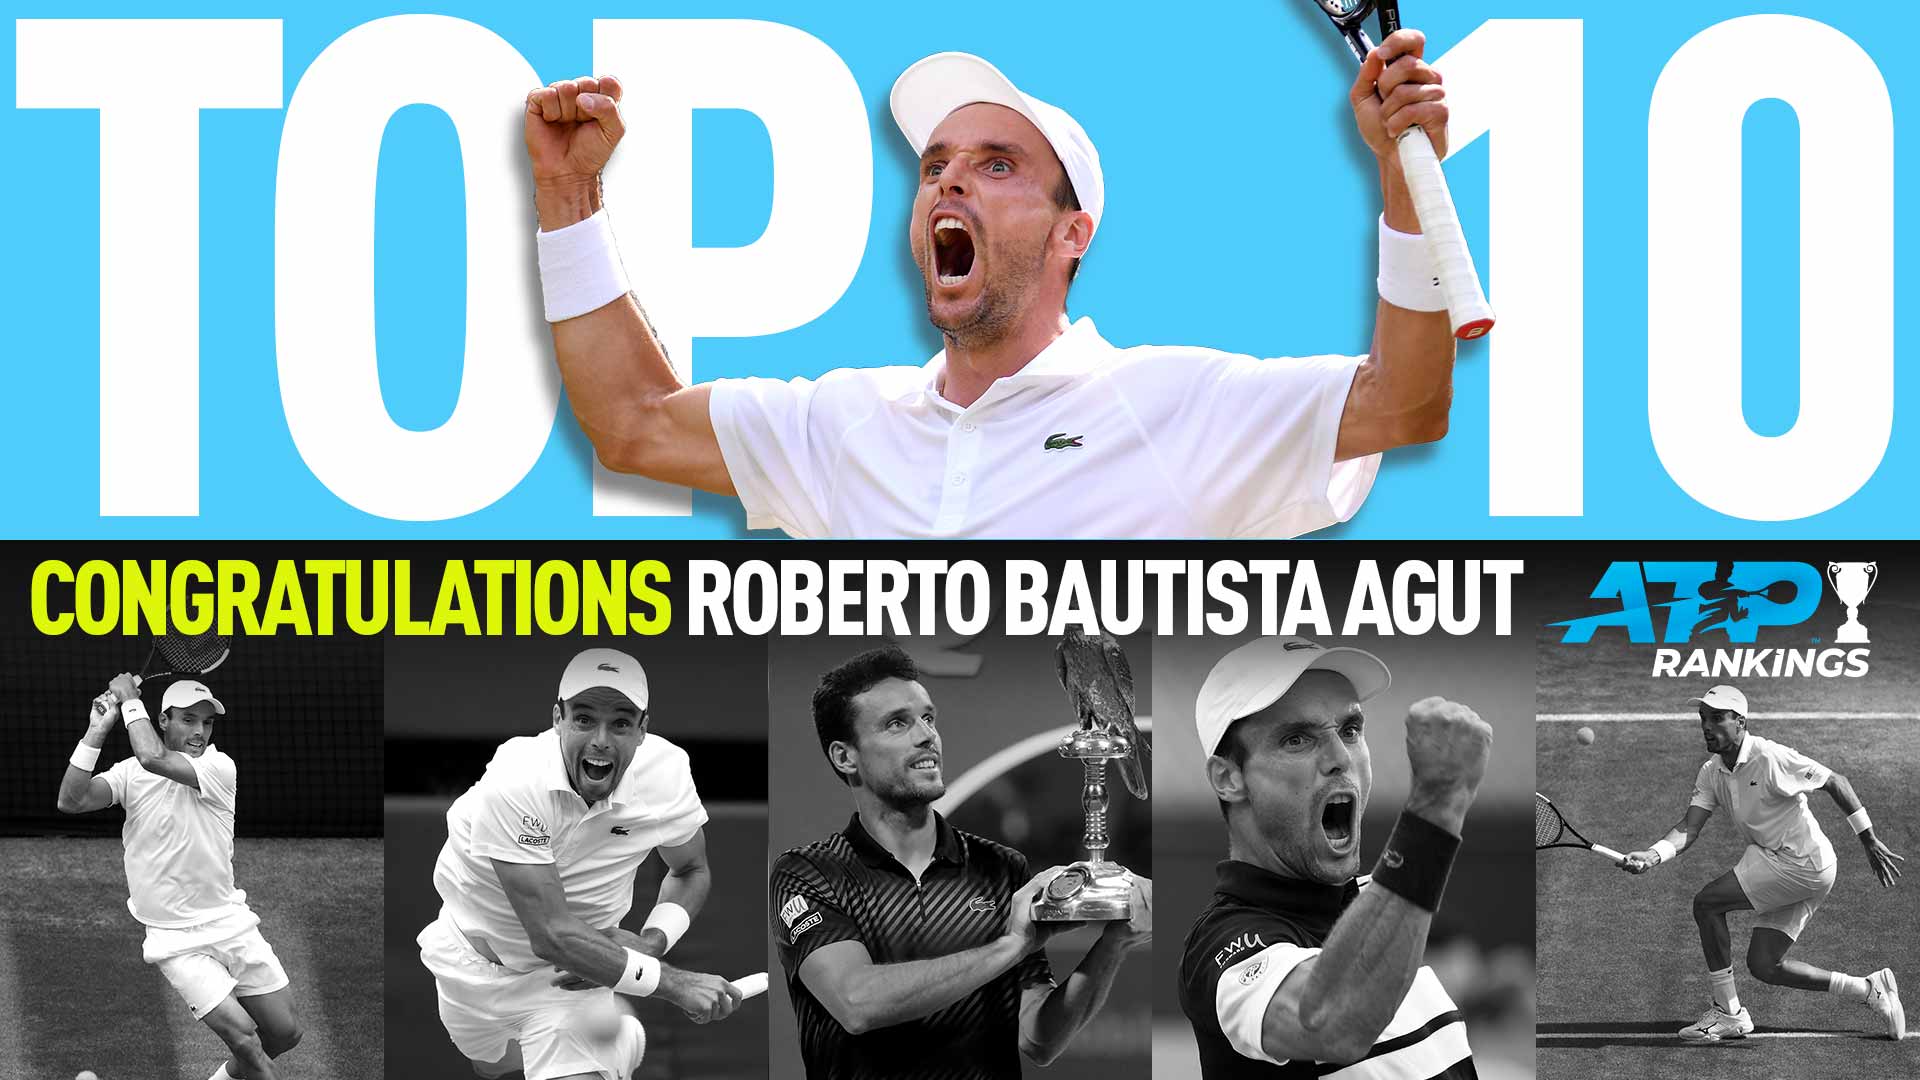 Roberto Bautista Agut makes his debut in the Top 10 of the ATP Rankings.